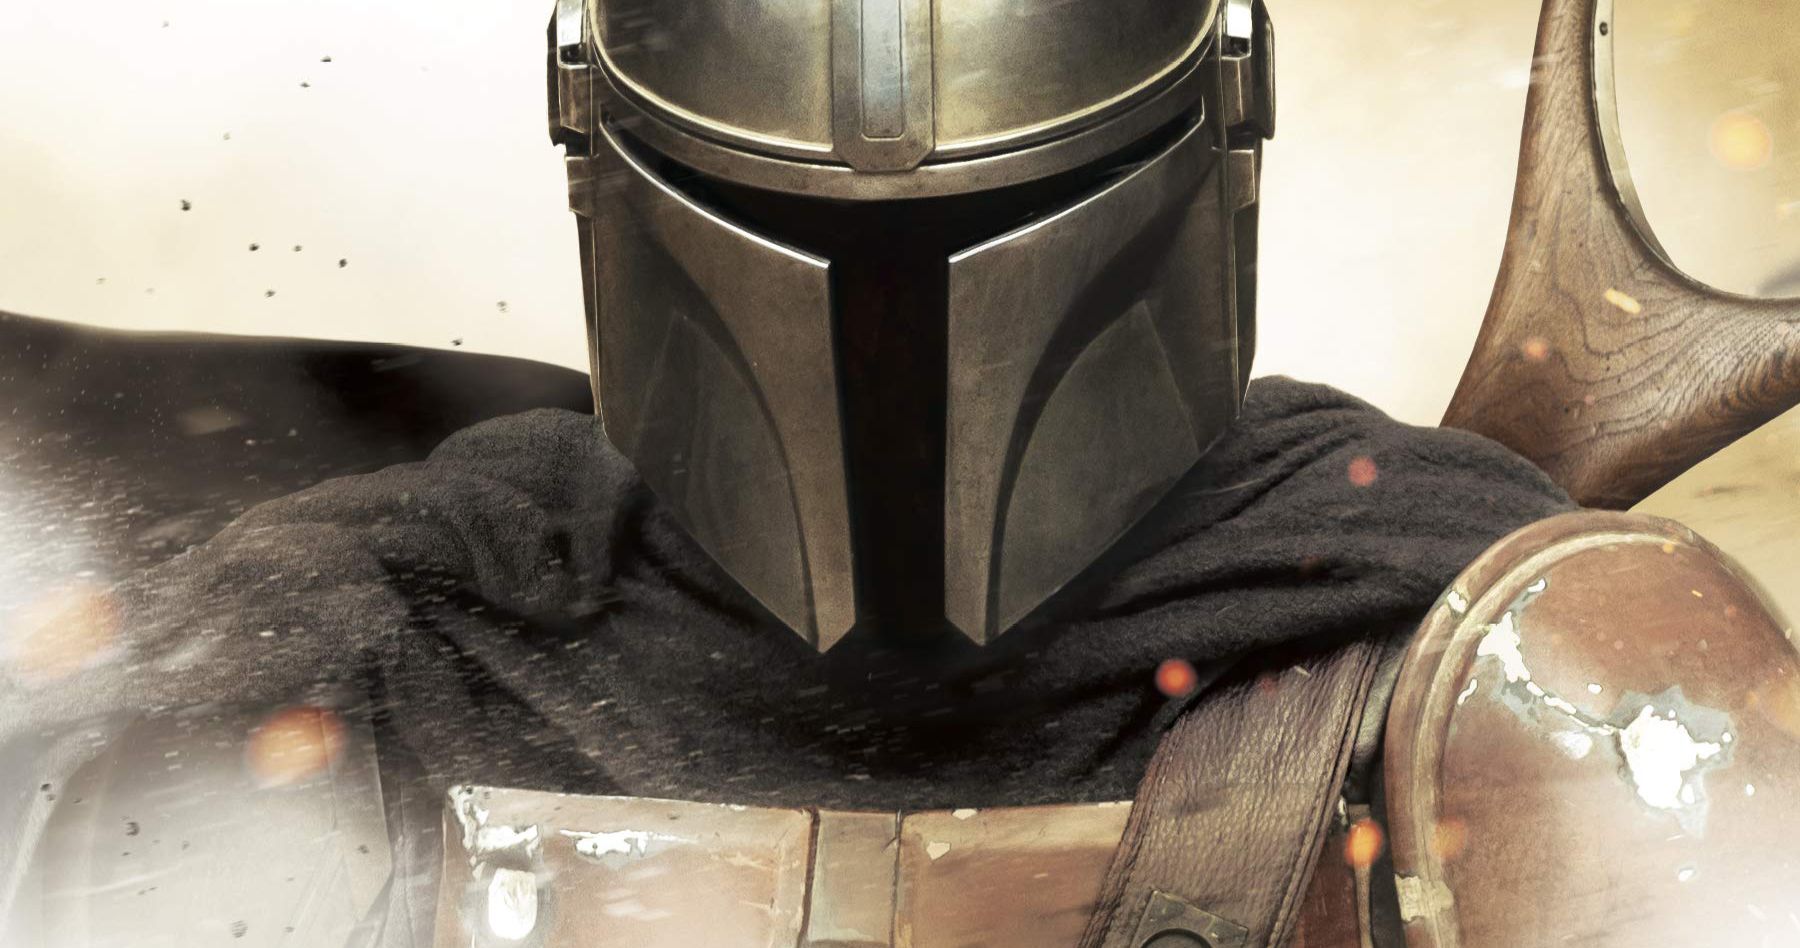 The Mandalorian Season 3 Reportedly Begins Filming Without Pedro Pascal